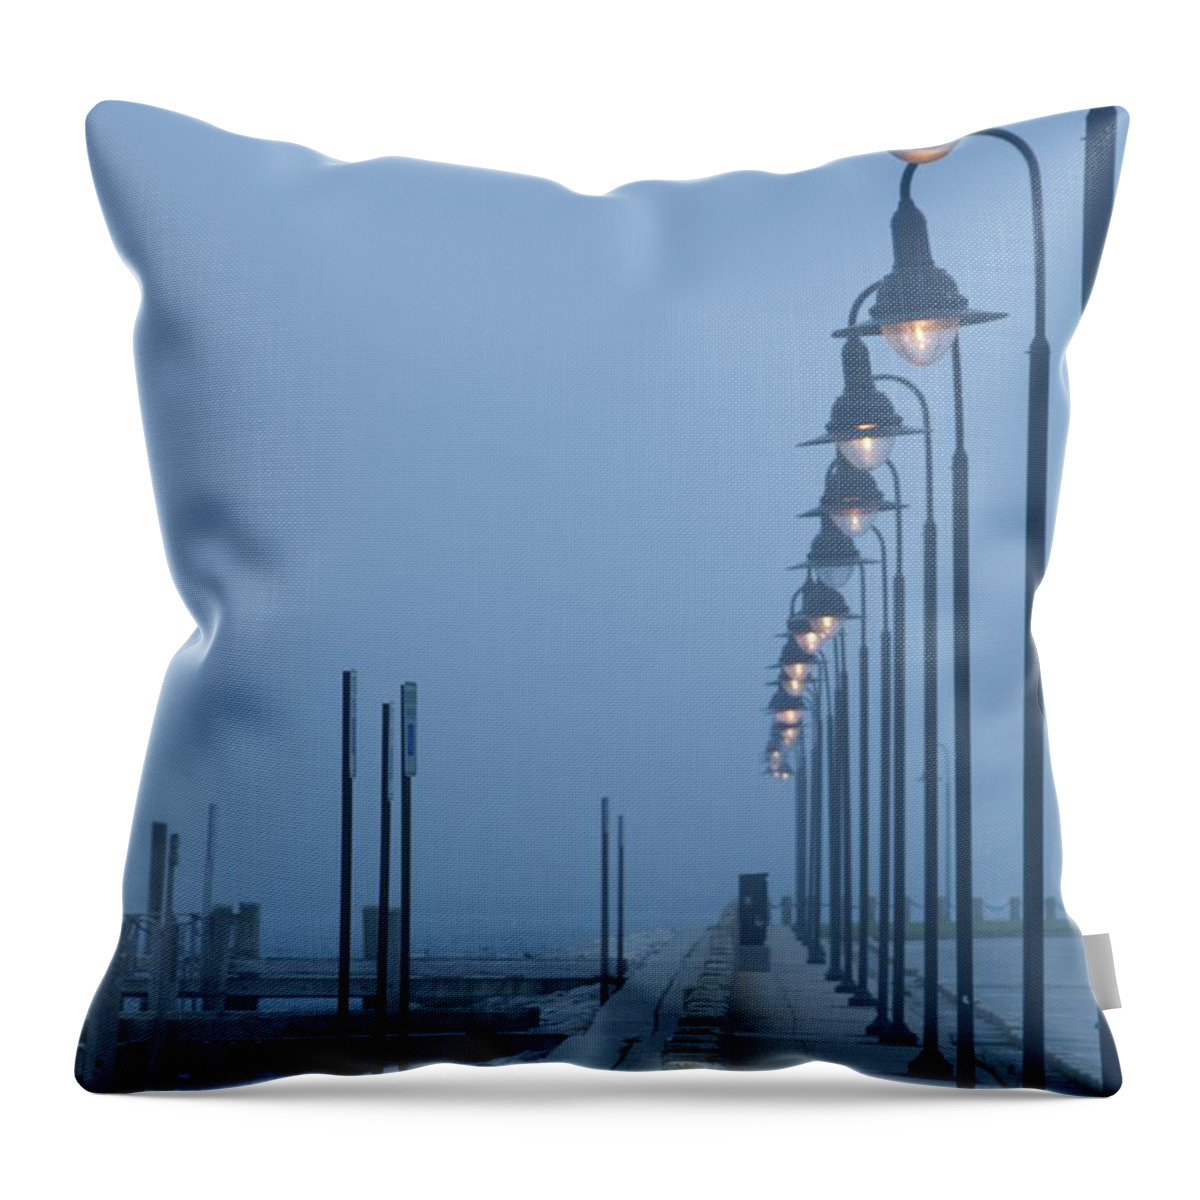 Fog Throw Pillow featuring the photograph Foggy Evening by Steven Natanson